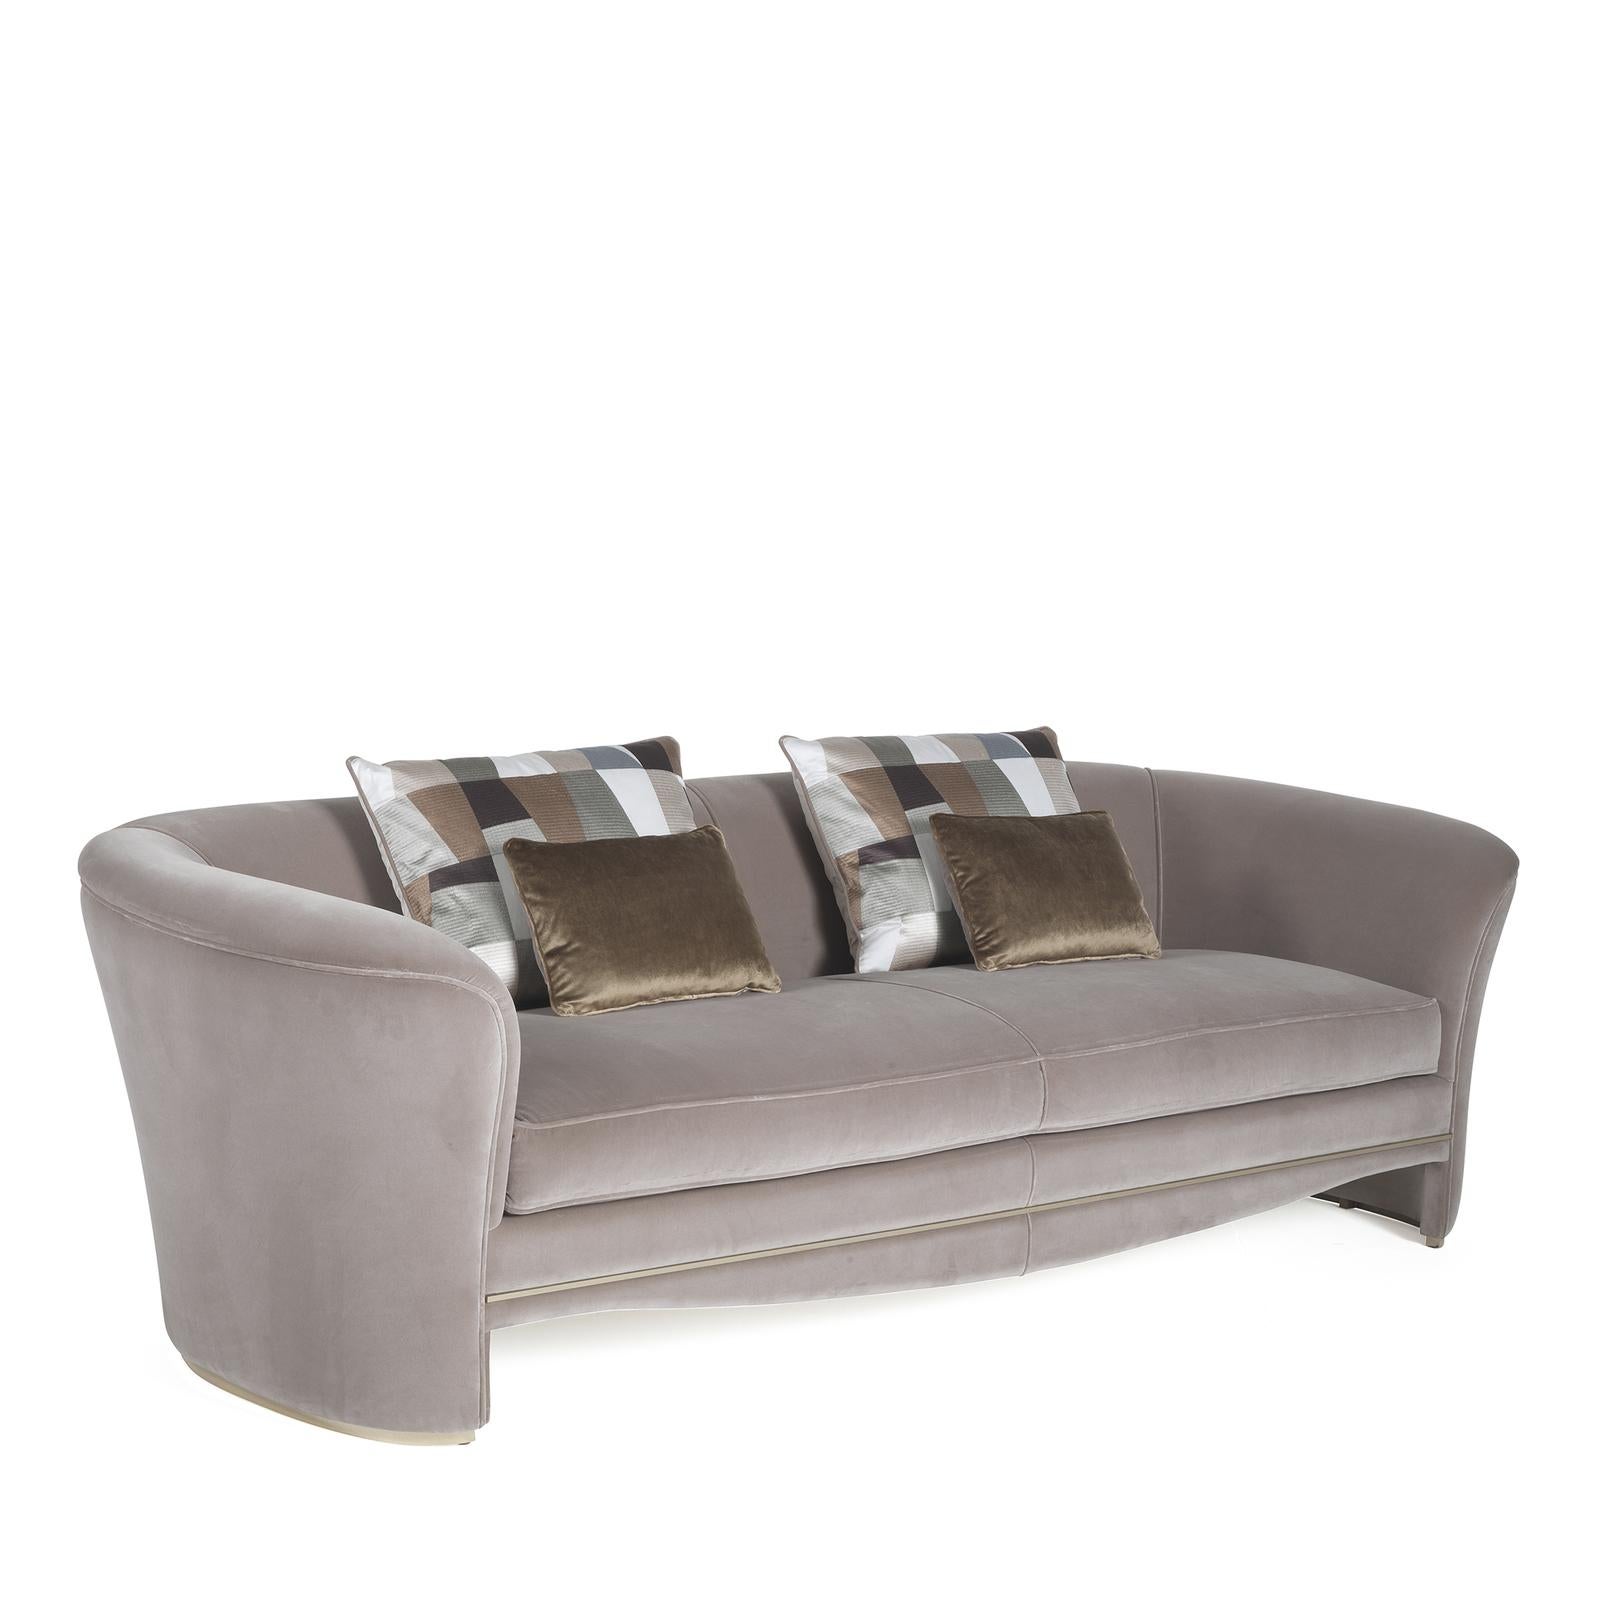 From the Jacob collection, this exceptional sofa offers maximum comfort and an elegant allure. A modern take on the Cabriole style, the curves of the broad back effortlessly flow into the sinuous arms, creating an embracing silhouette. The wood